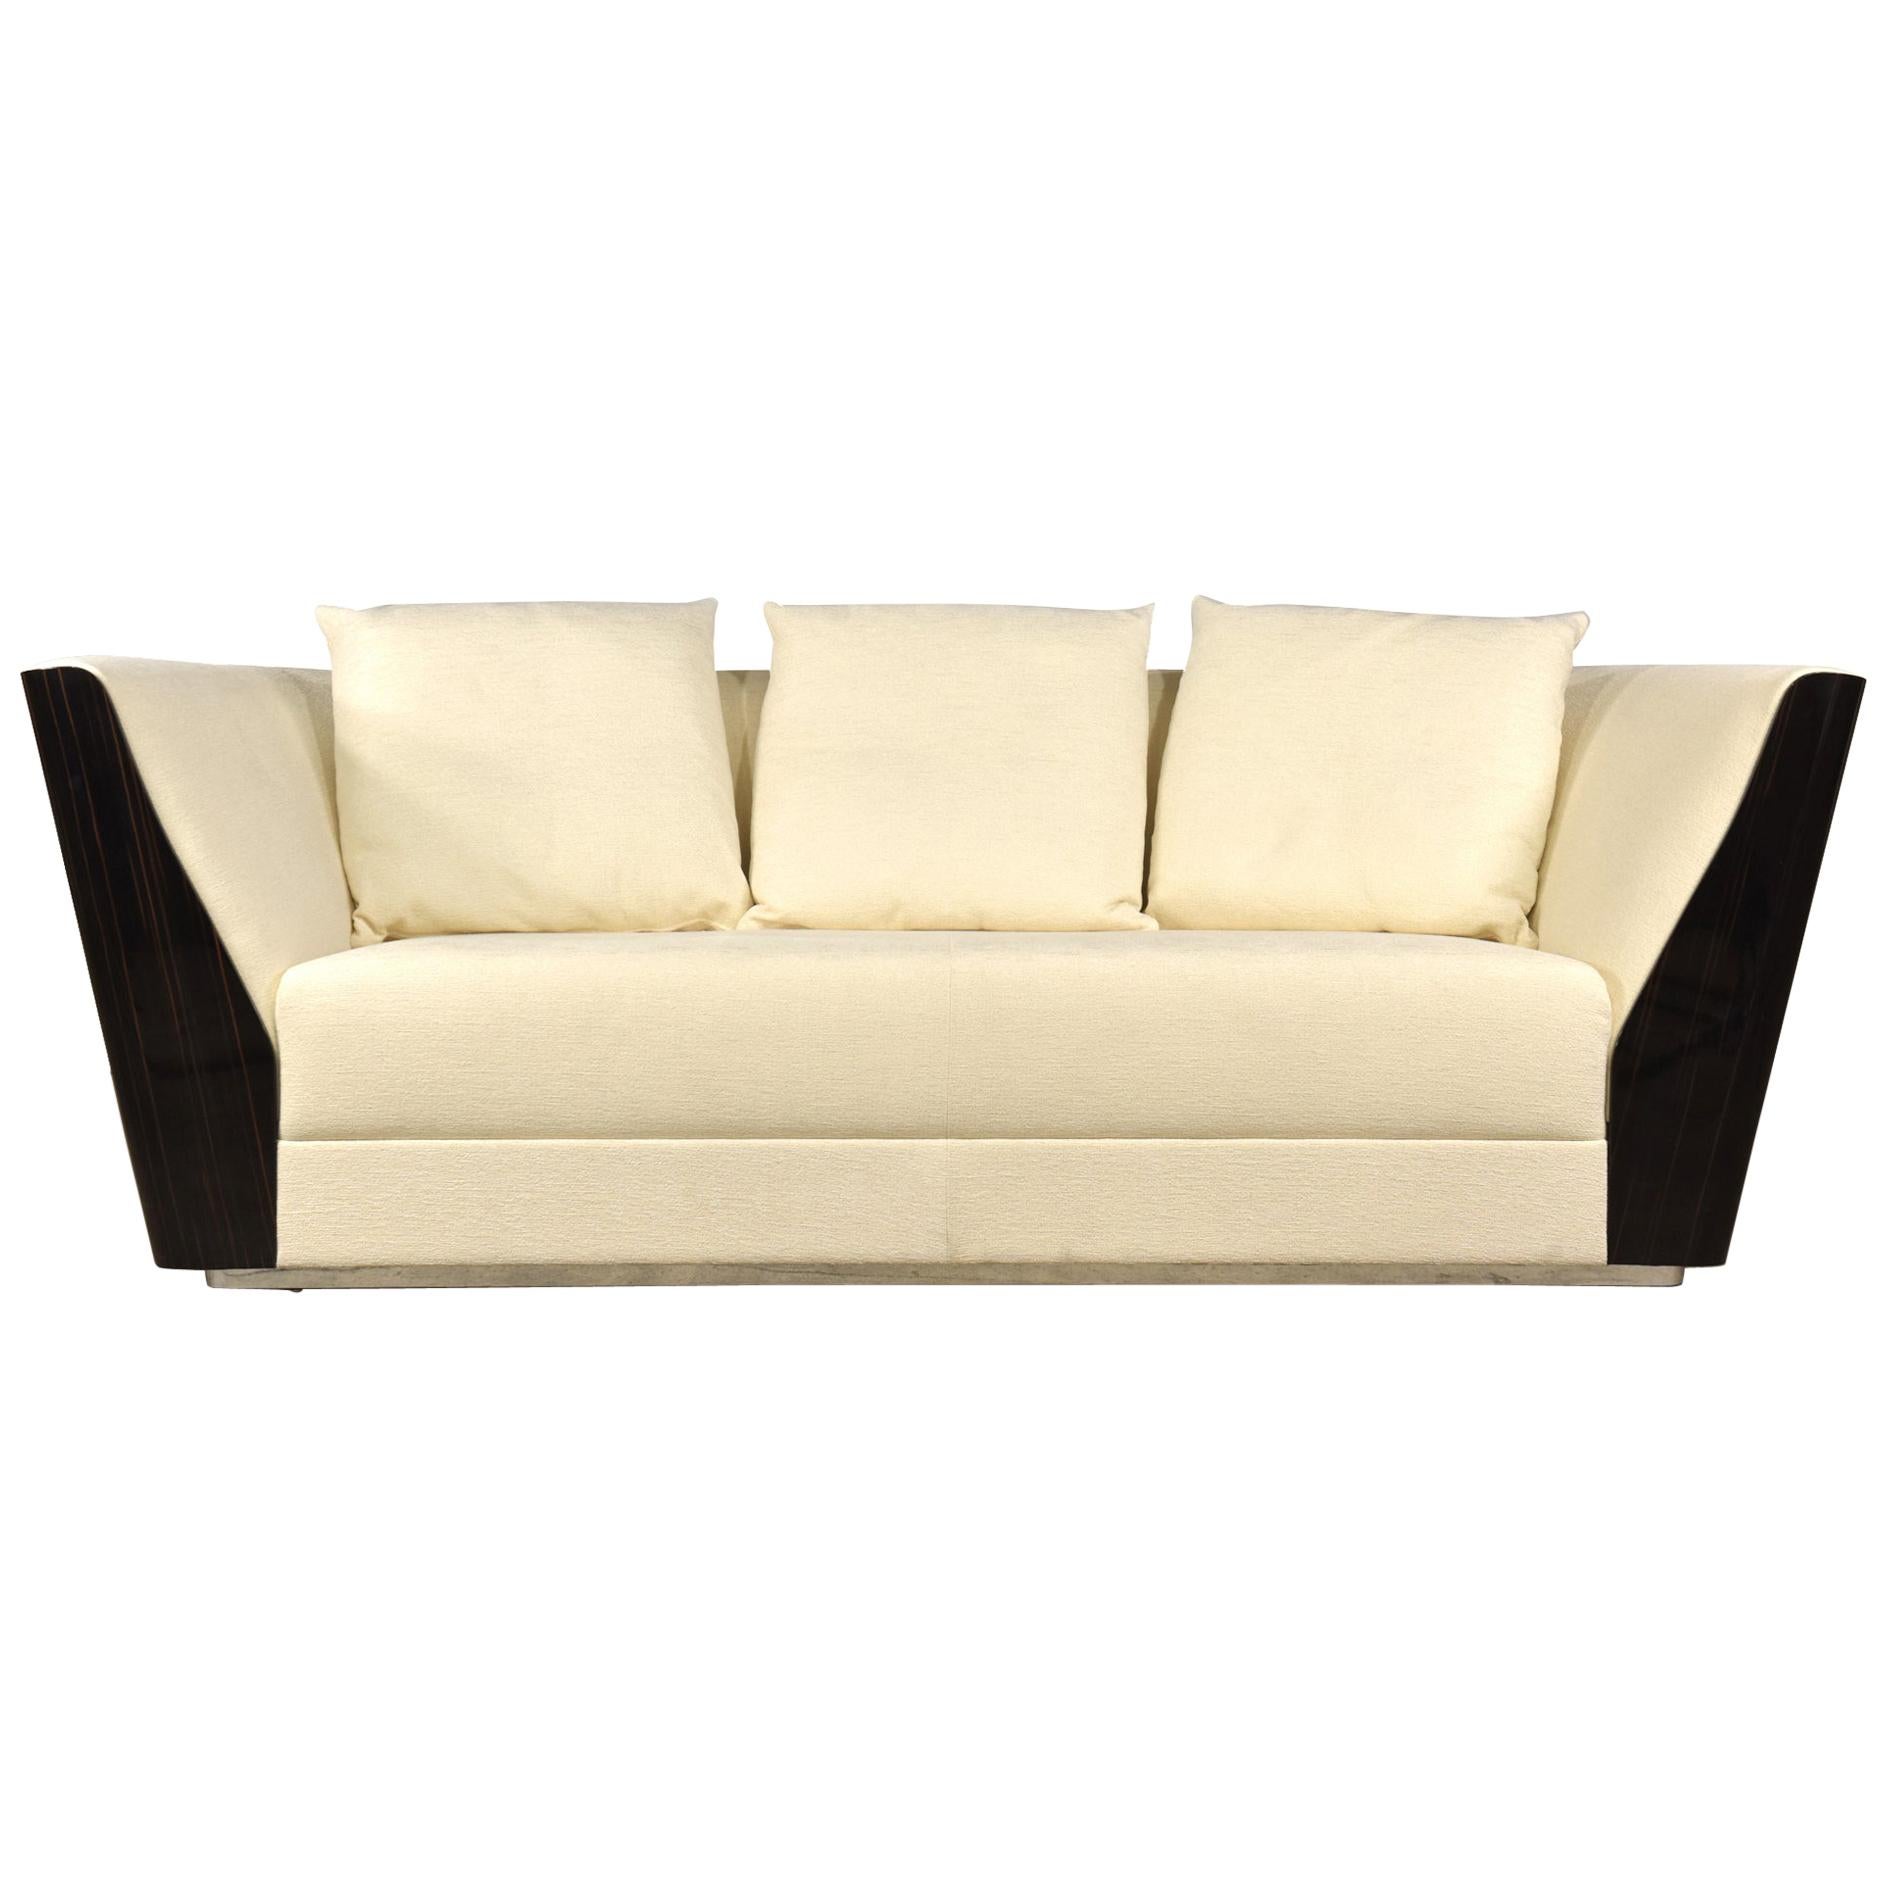 Heritage Collection Oasi 2-Seat Sofa For Sale